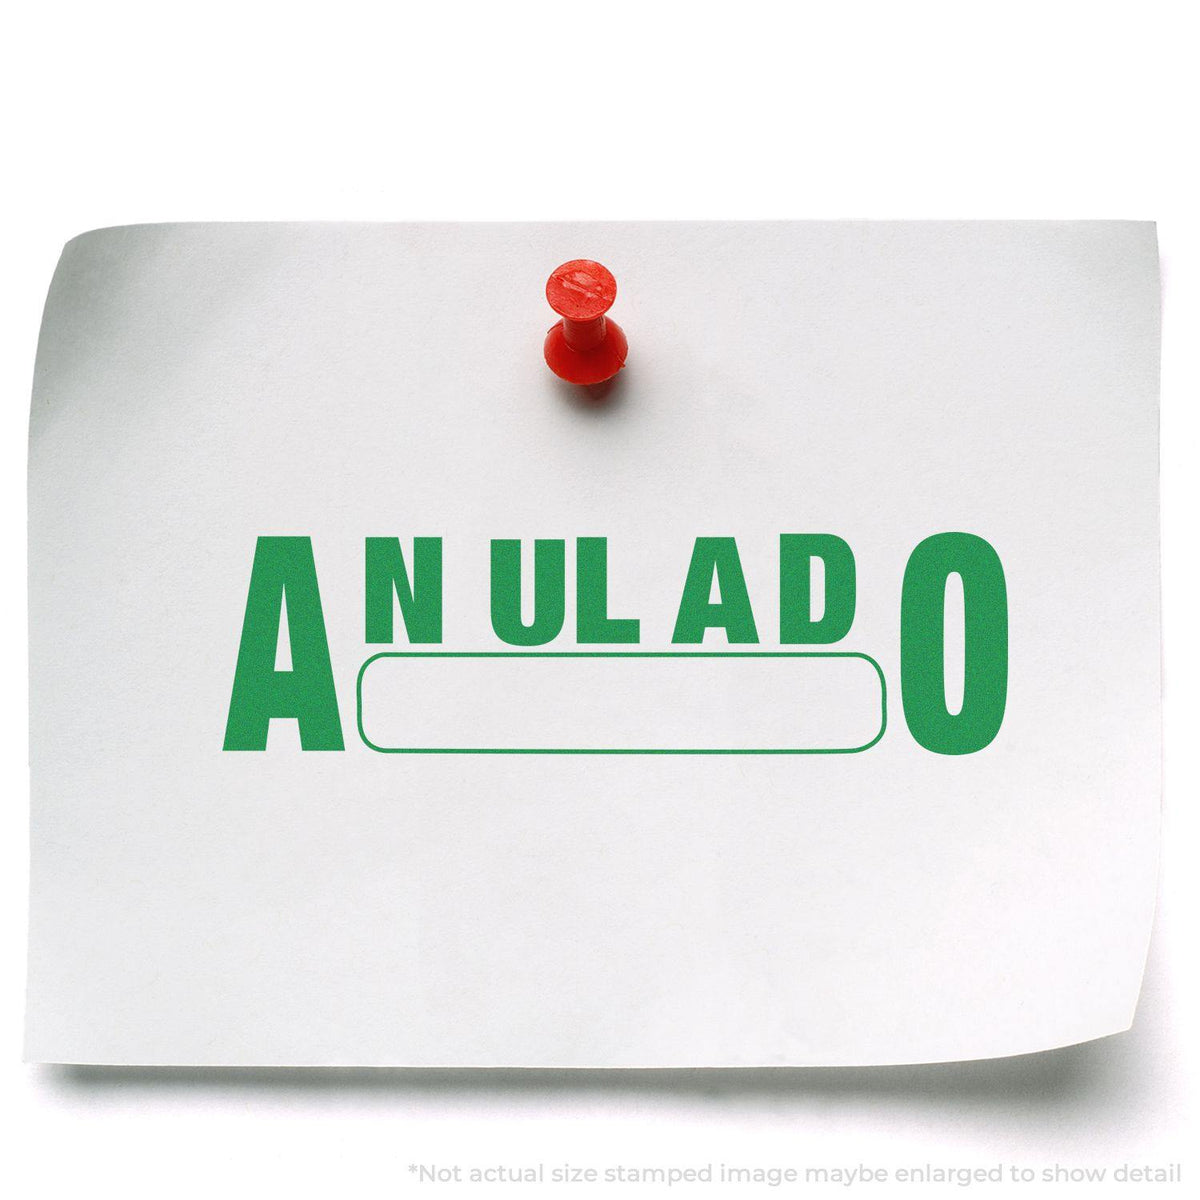 Large Self-Inking Anulado Stamp In Use Photo